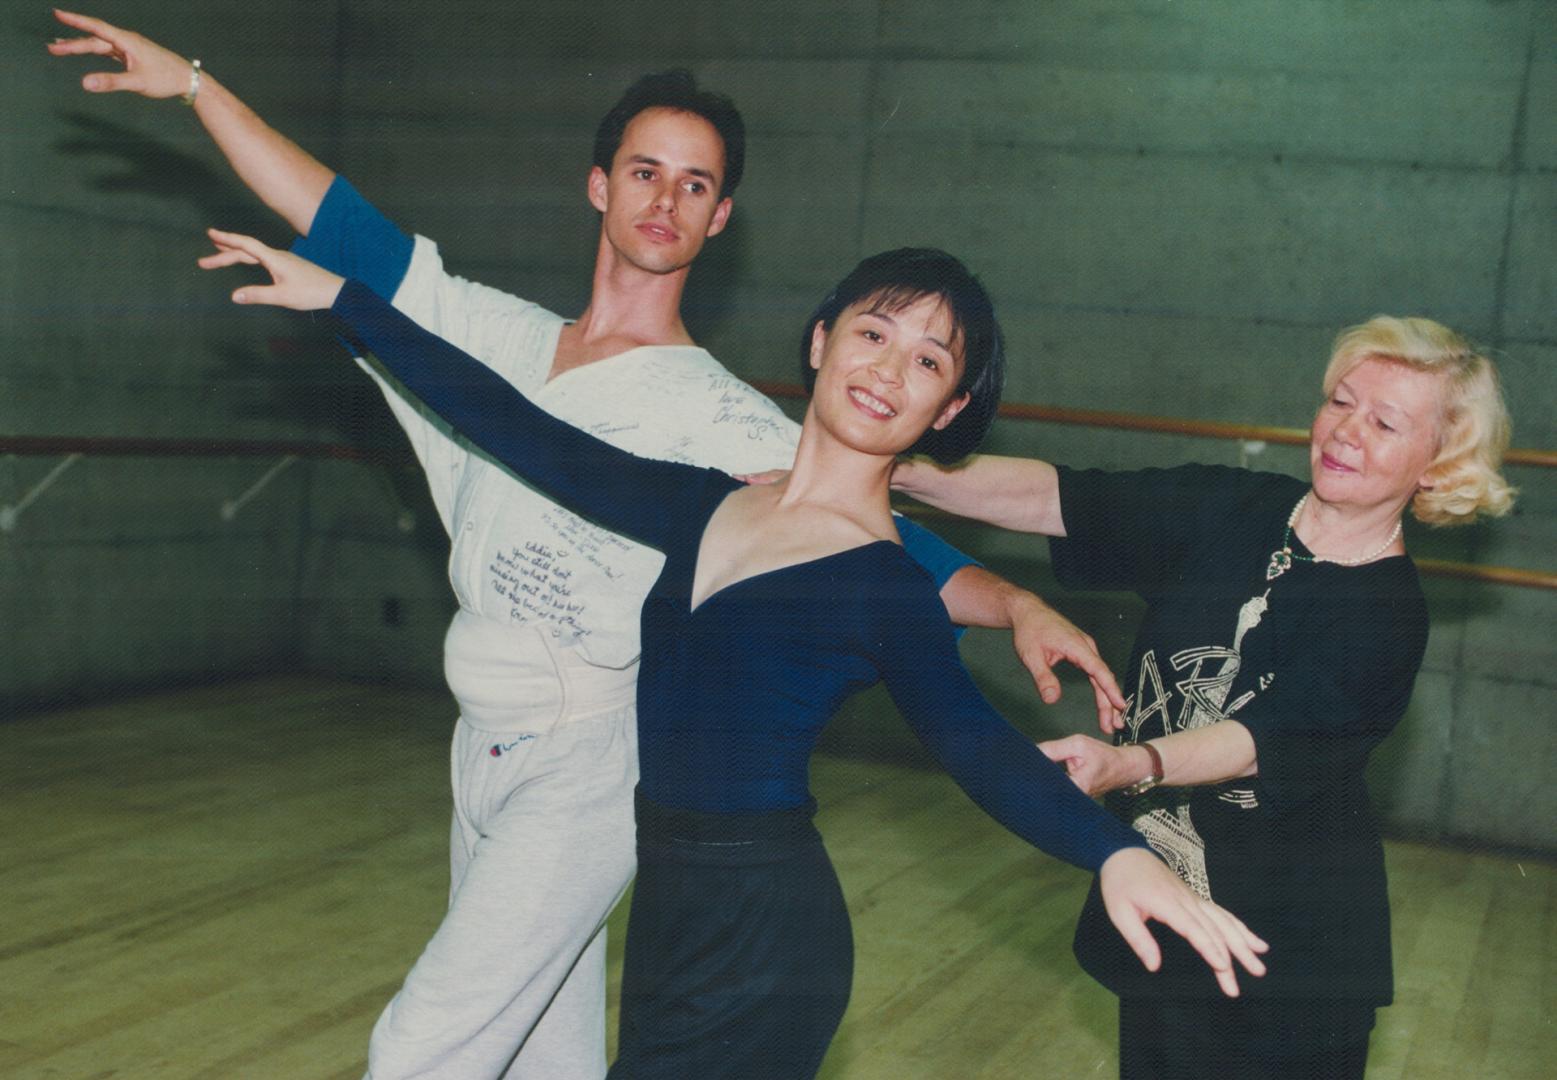 Irina Trofimova (right) works with Edward Ellison and Al-Ping Wang at the National Ballet School